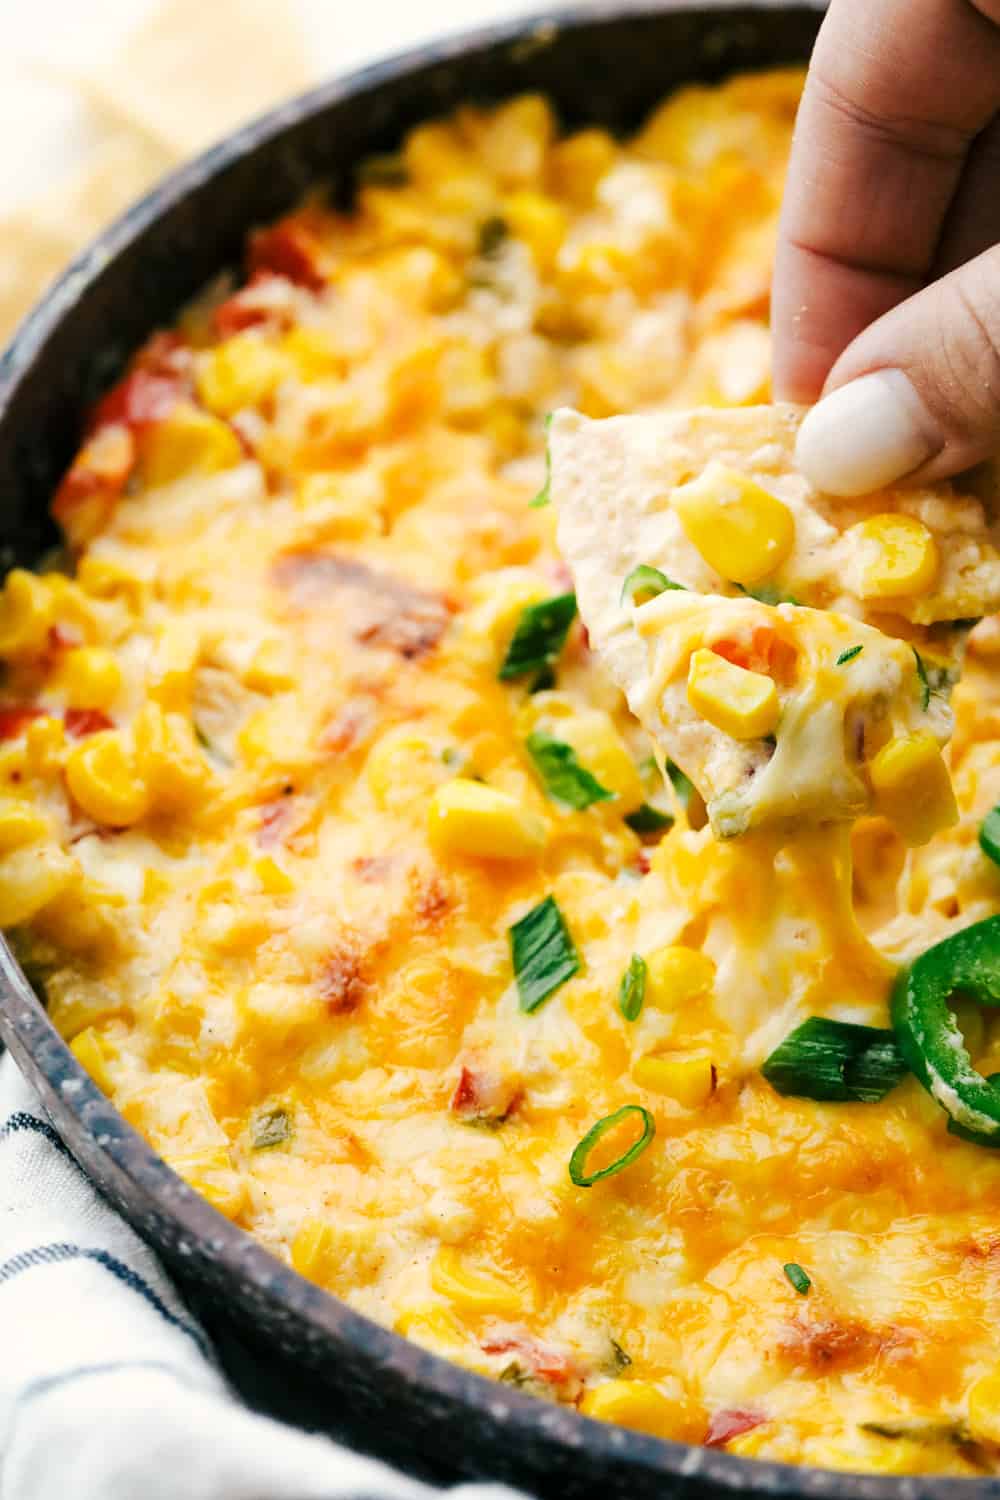 Hot Corn Dip with onions, peppers, jalapeno and ooey gooey cheese, served with corn chips.